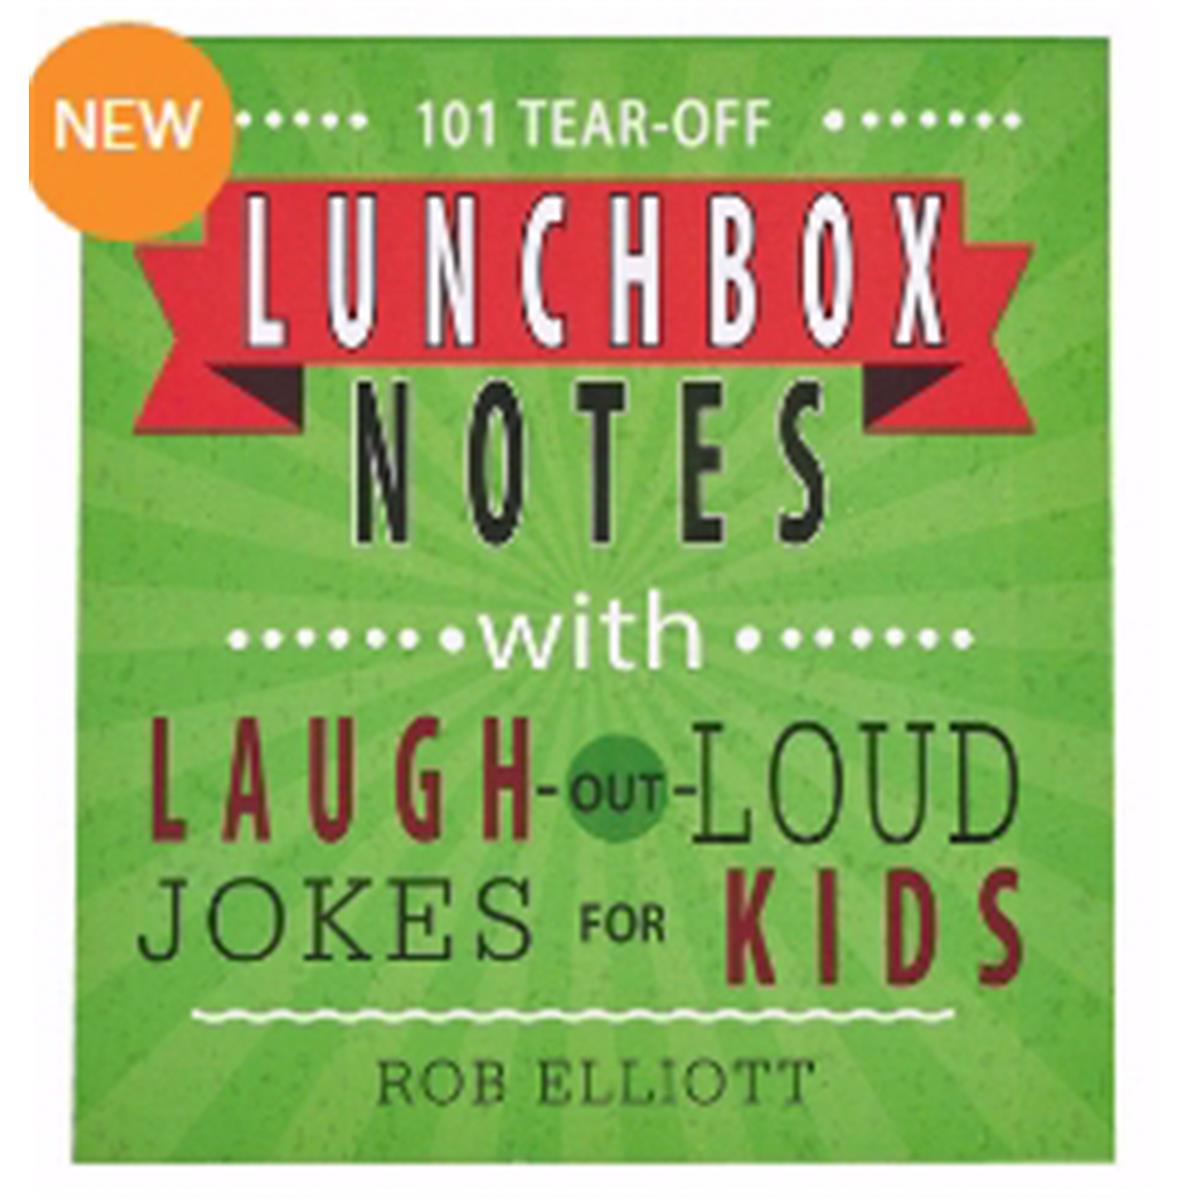 Christian Art Gifts 158598 Out Loud Jokes Lunchbox Notes with Laugh